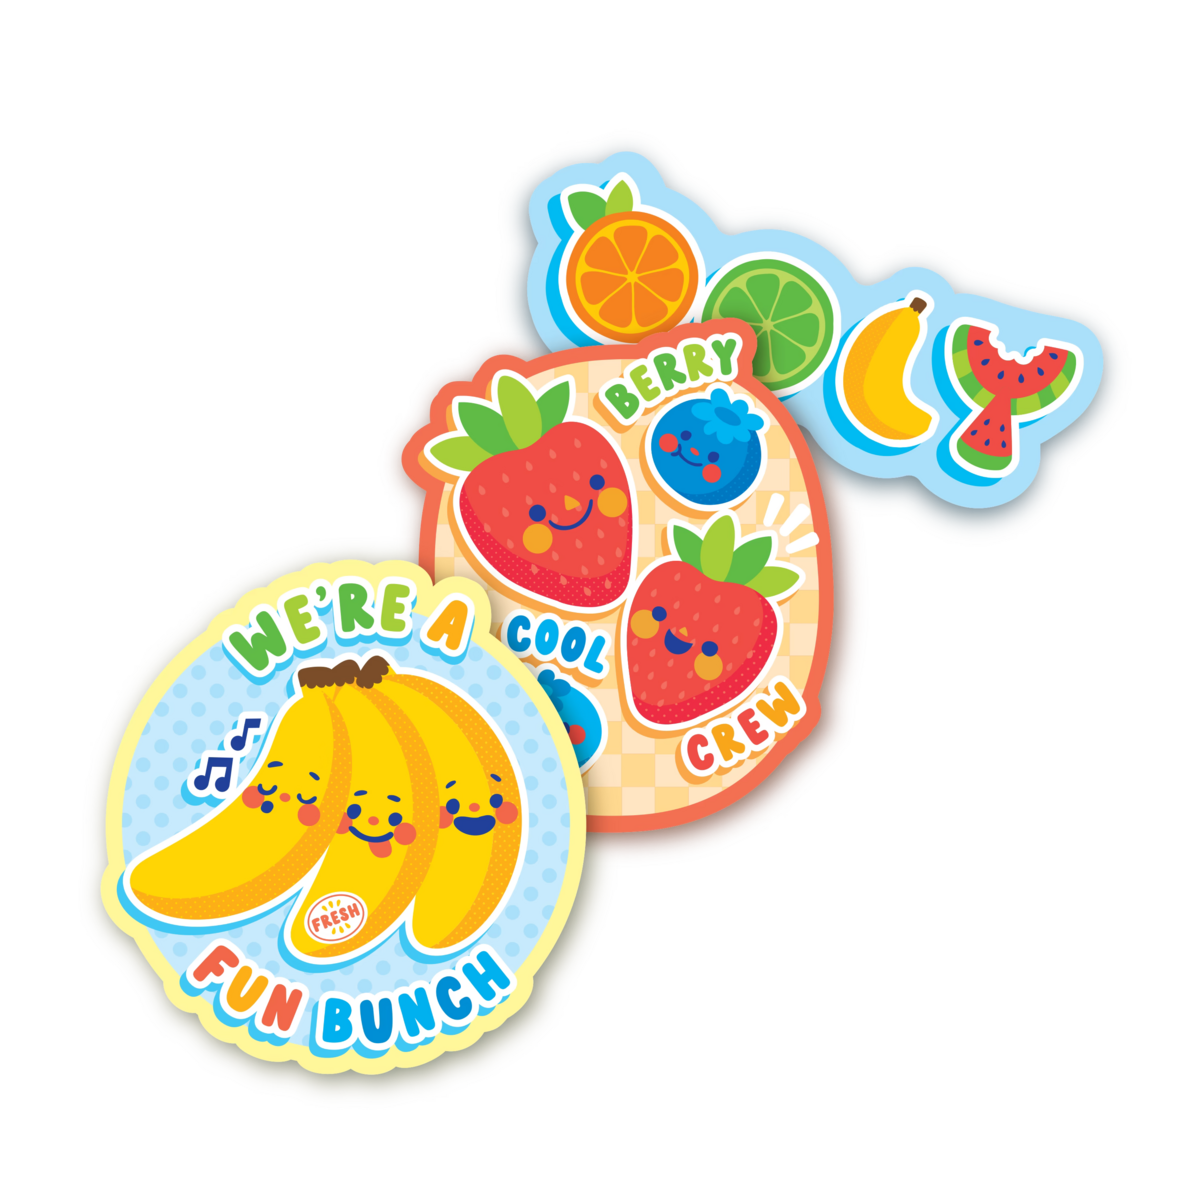 OOLY: Stickville waterproof stickers